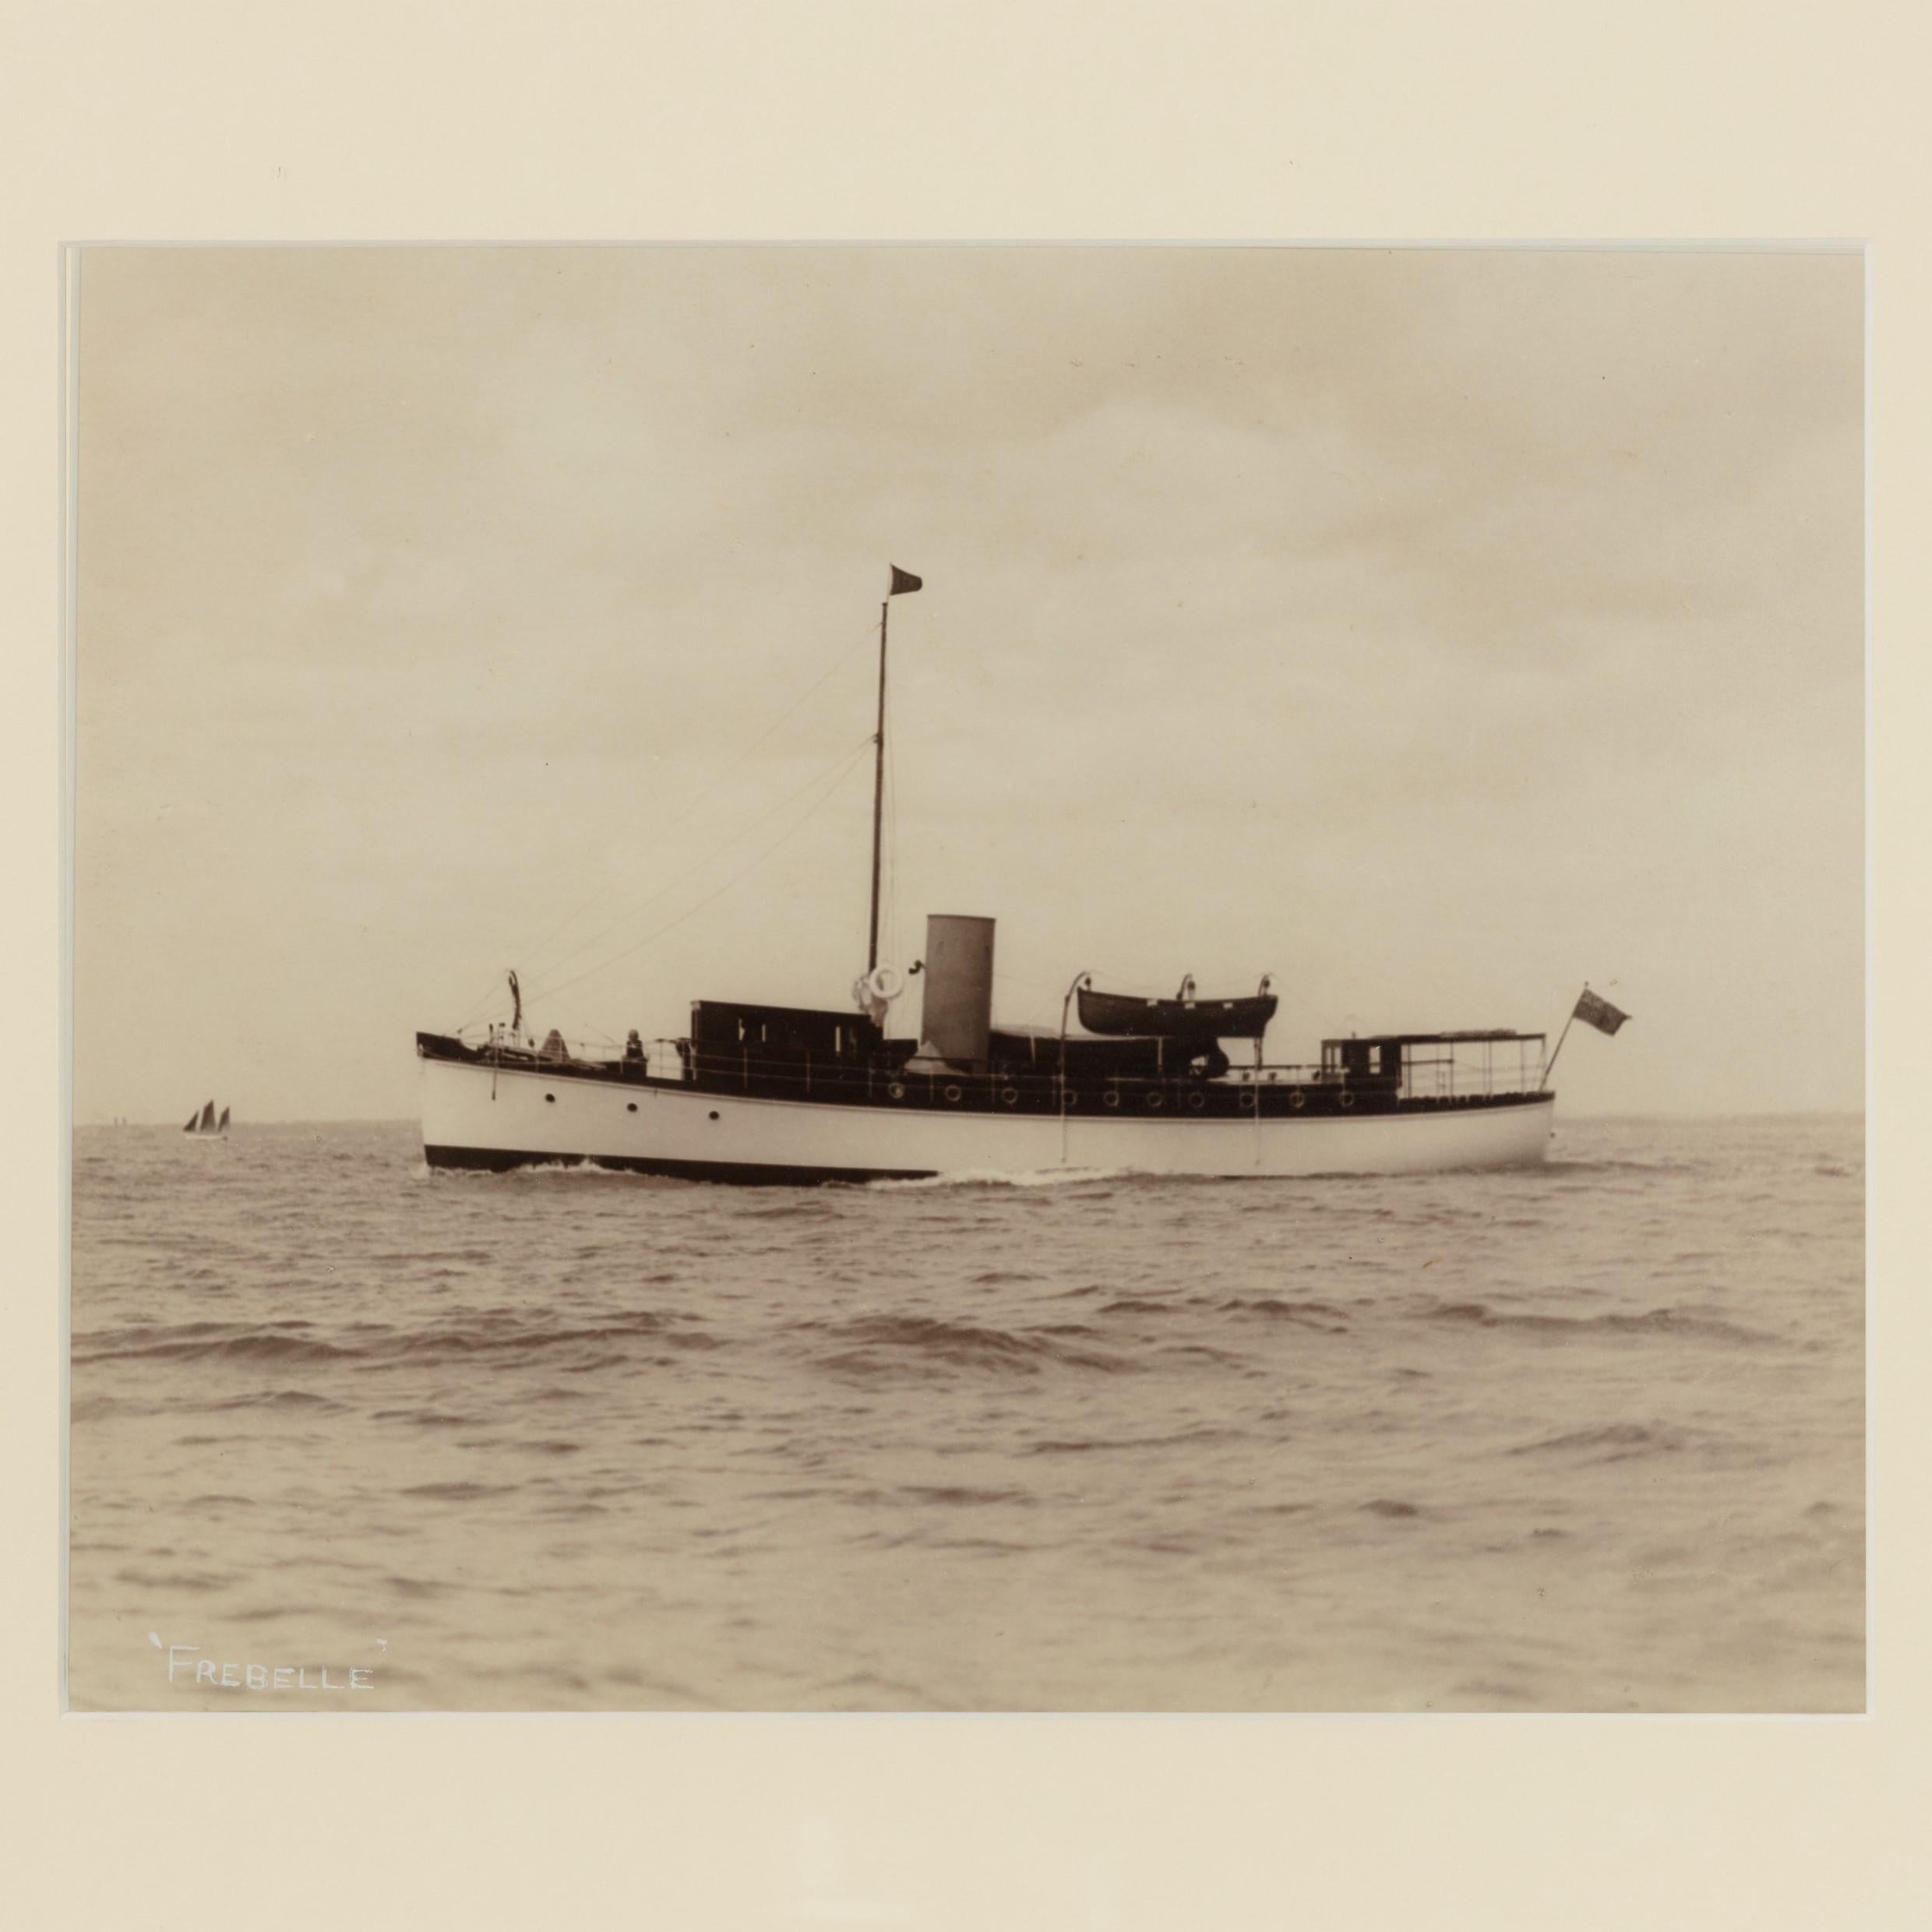 English Early Silver Gelatin Photographic Print of the Gentleman’s Yacht Frebelle